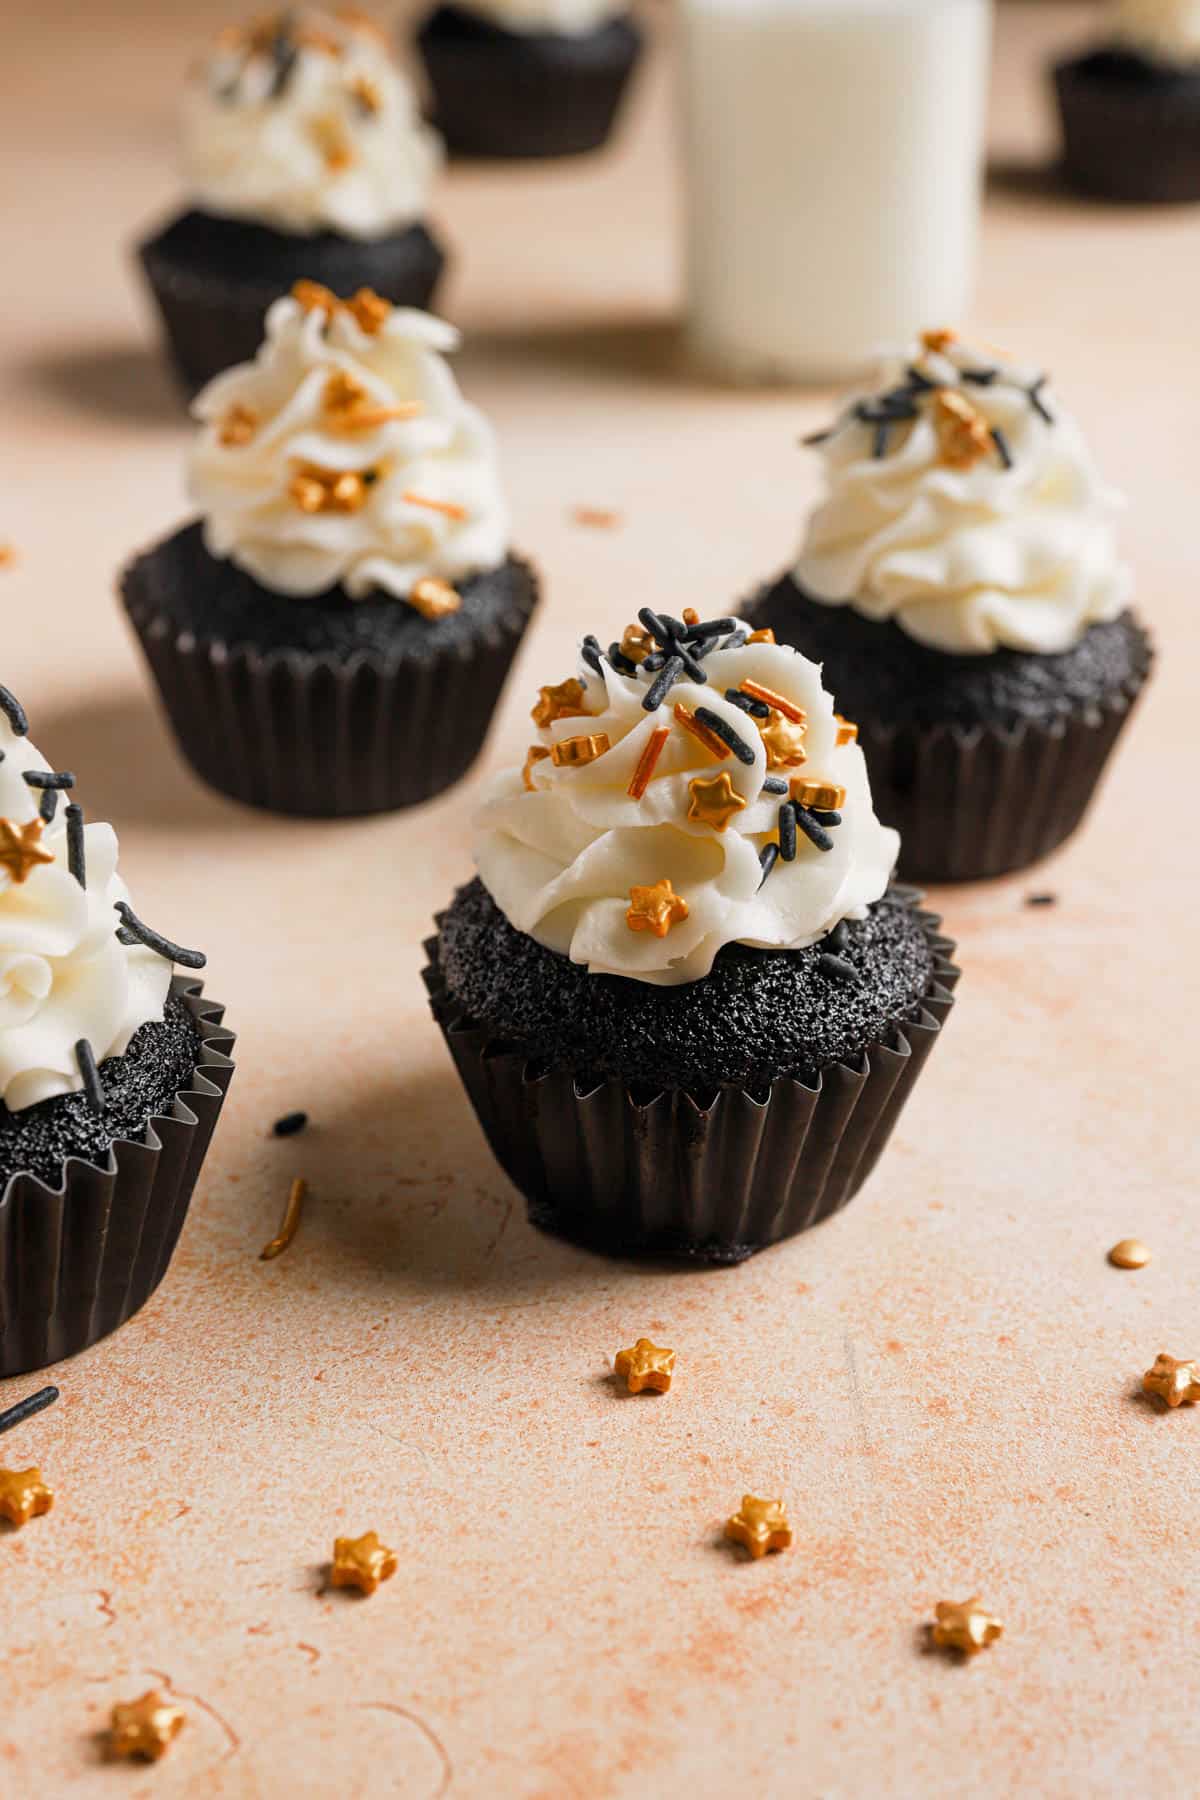 Deep, dark chocolate cupcakes are served on a table top in front of a glass of milk. They are decorated with white frosting and festive black and gold sprinkles.